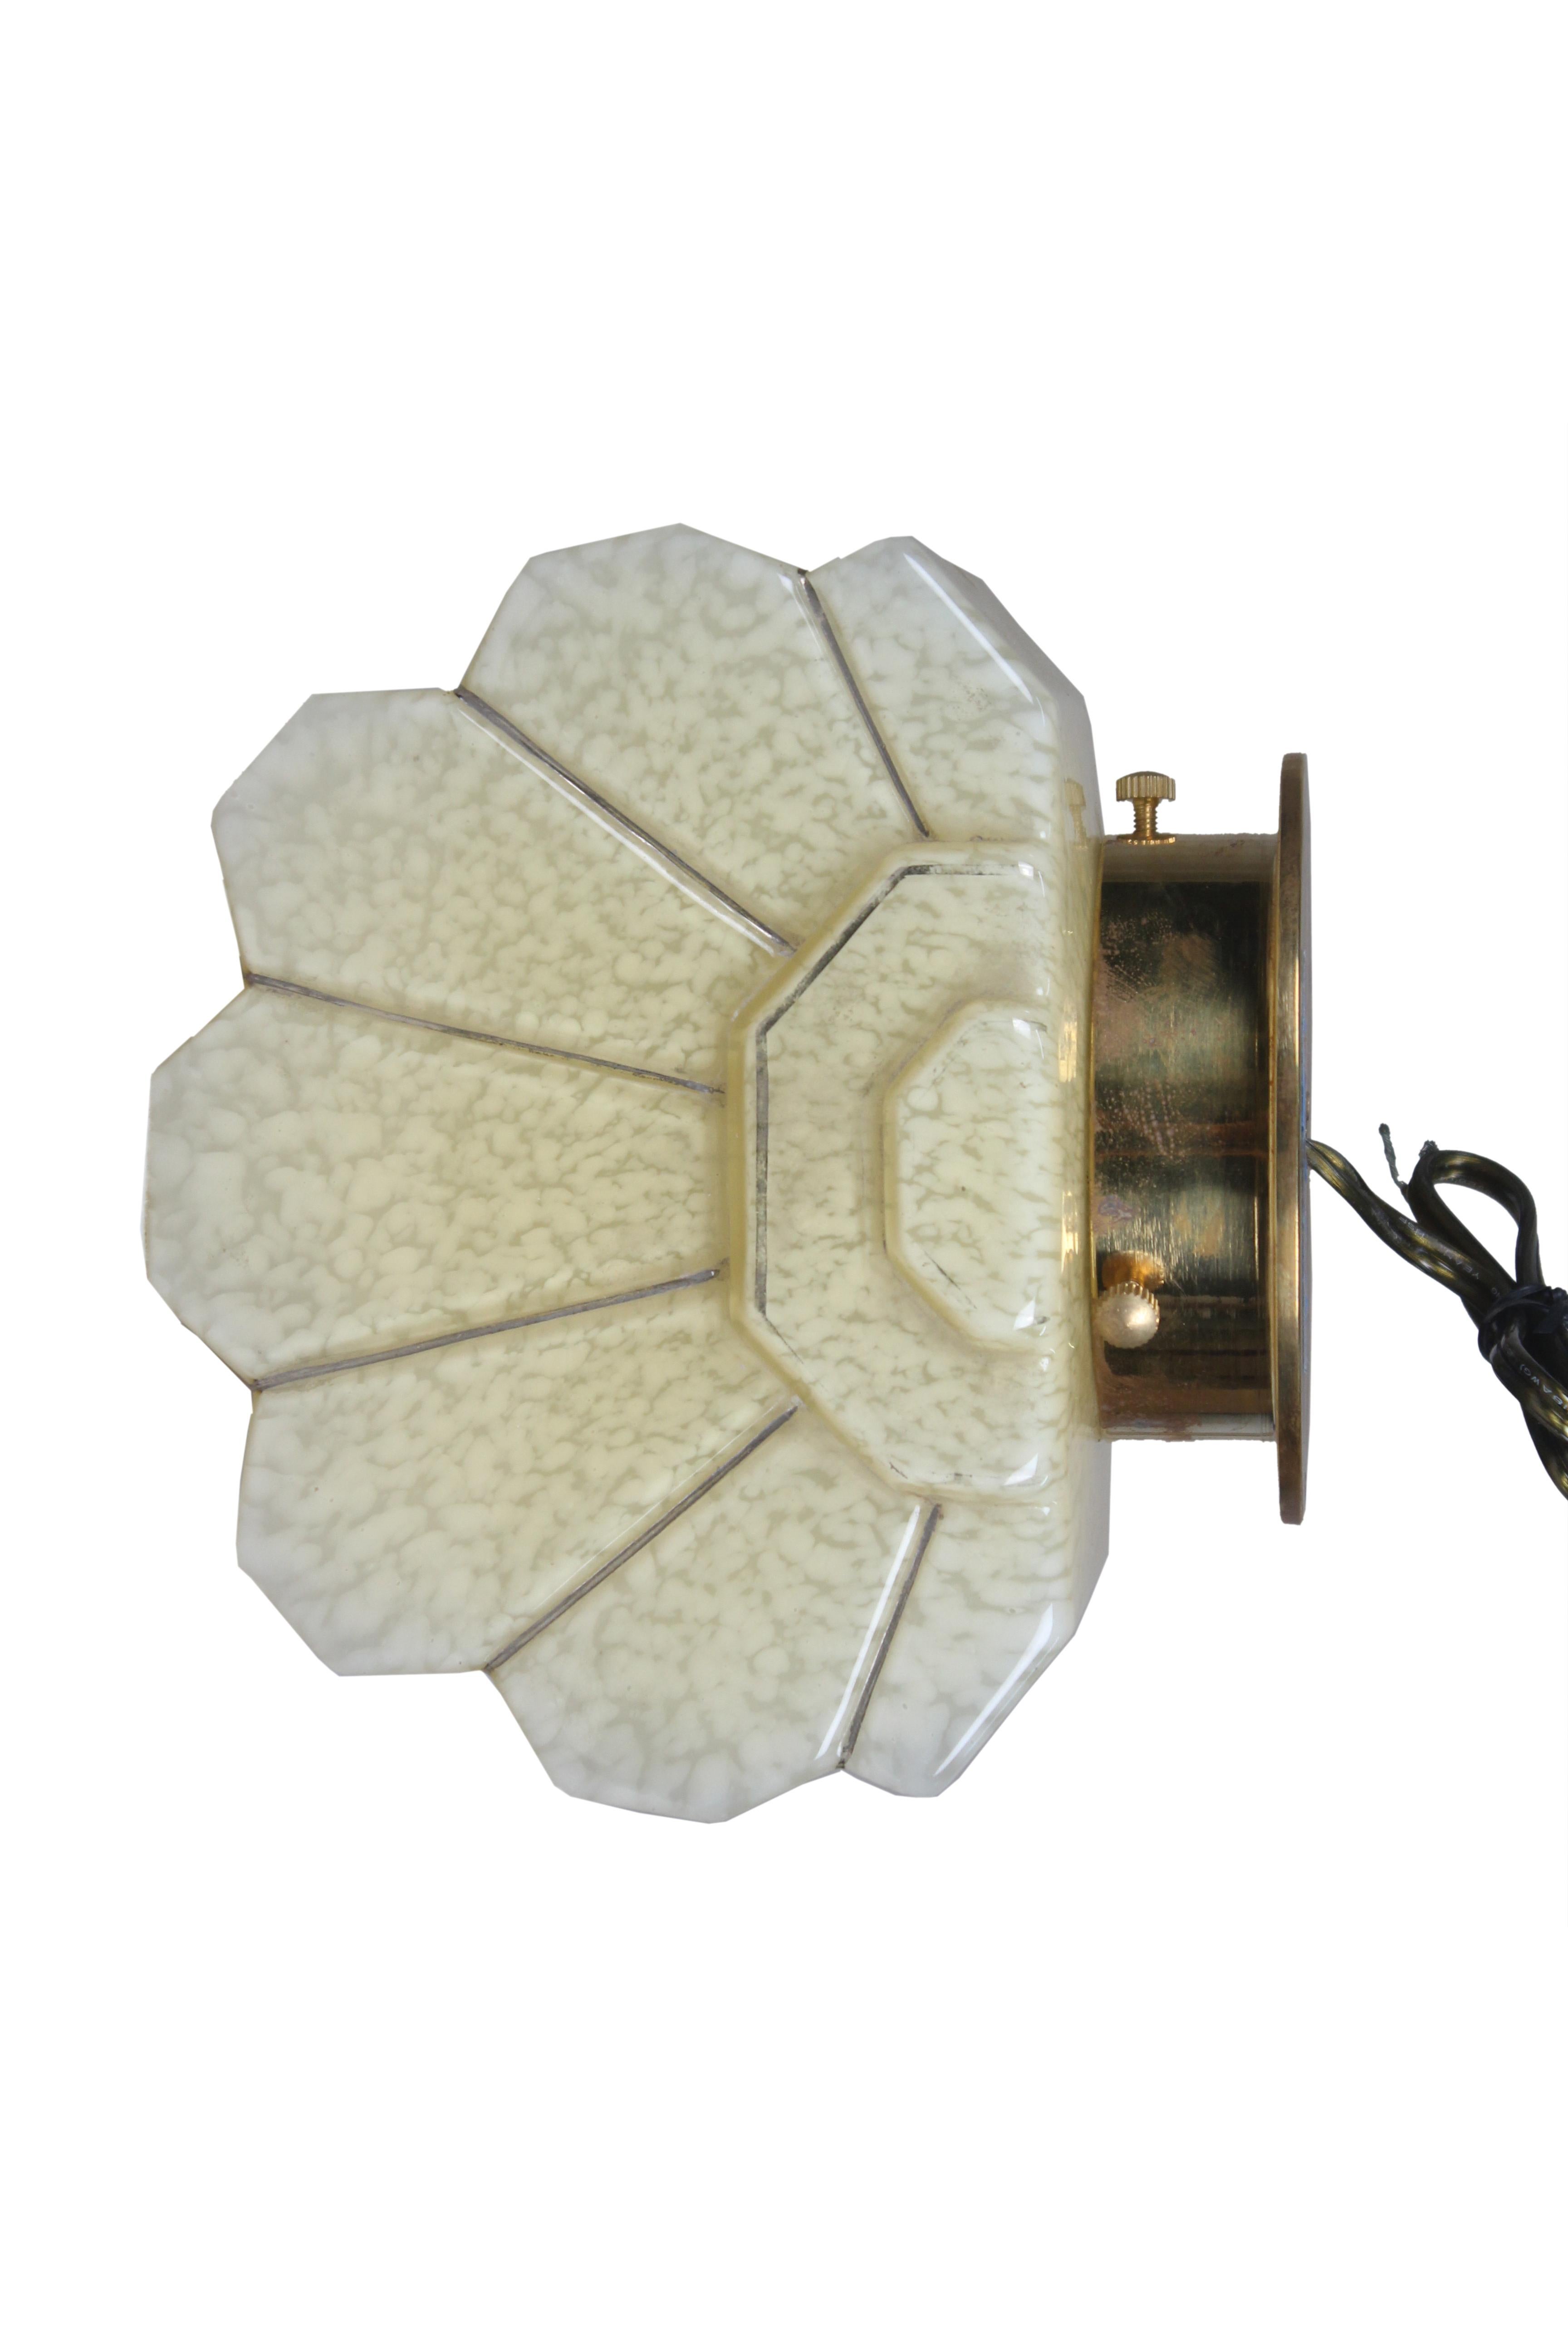 A fabulous pair of Art Deco glass sconce shades mounted on brass back plates. A soft off-white with great dimension. Originally European and rewired for American use. Takes a standard base bulb.